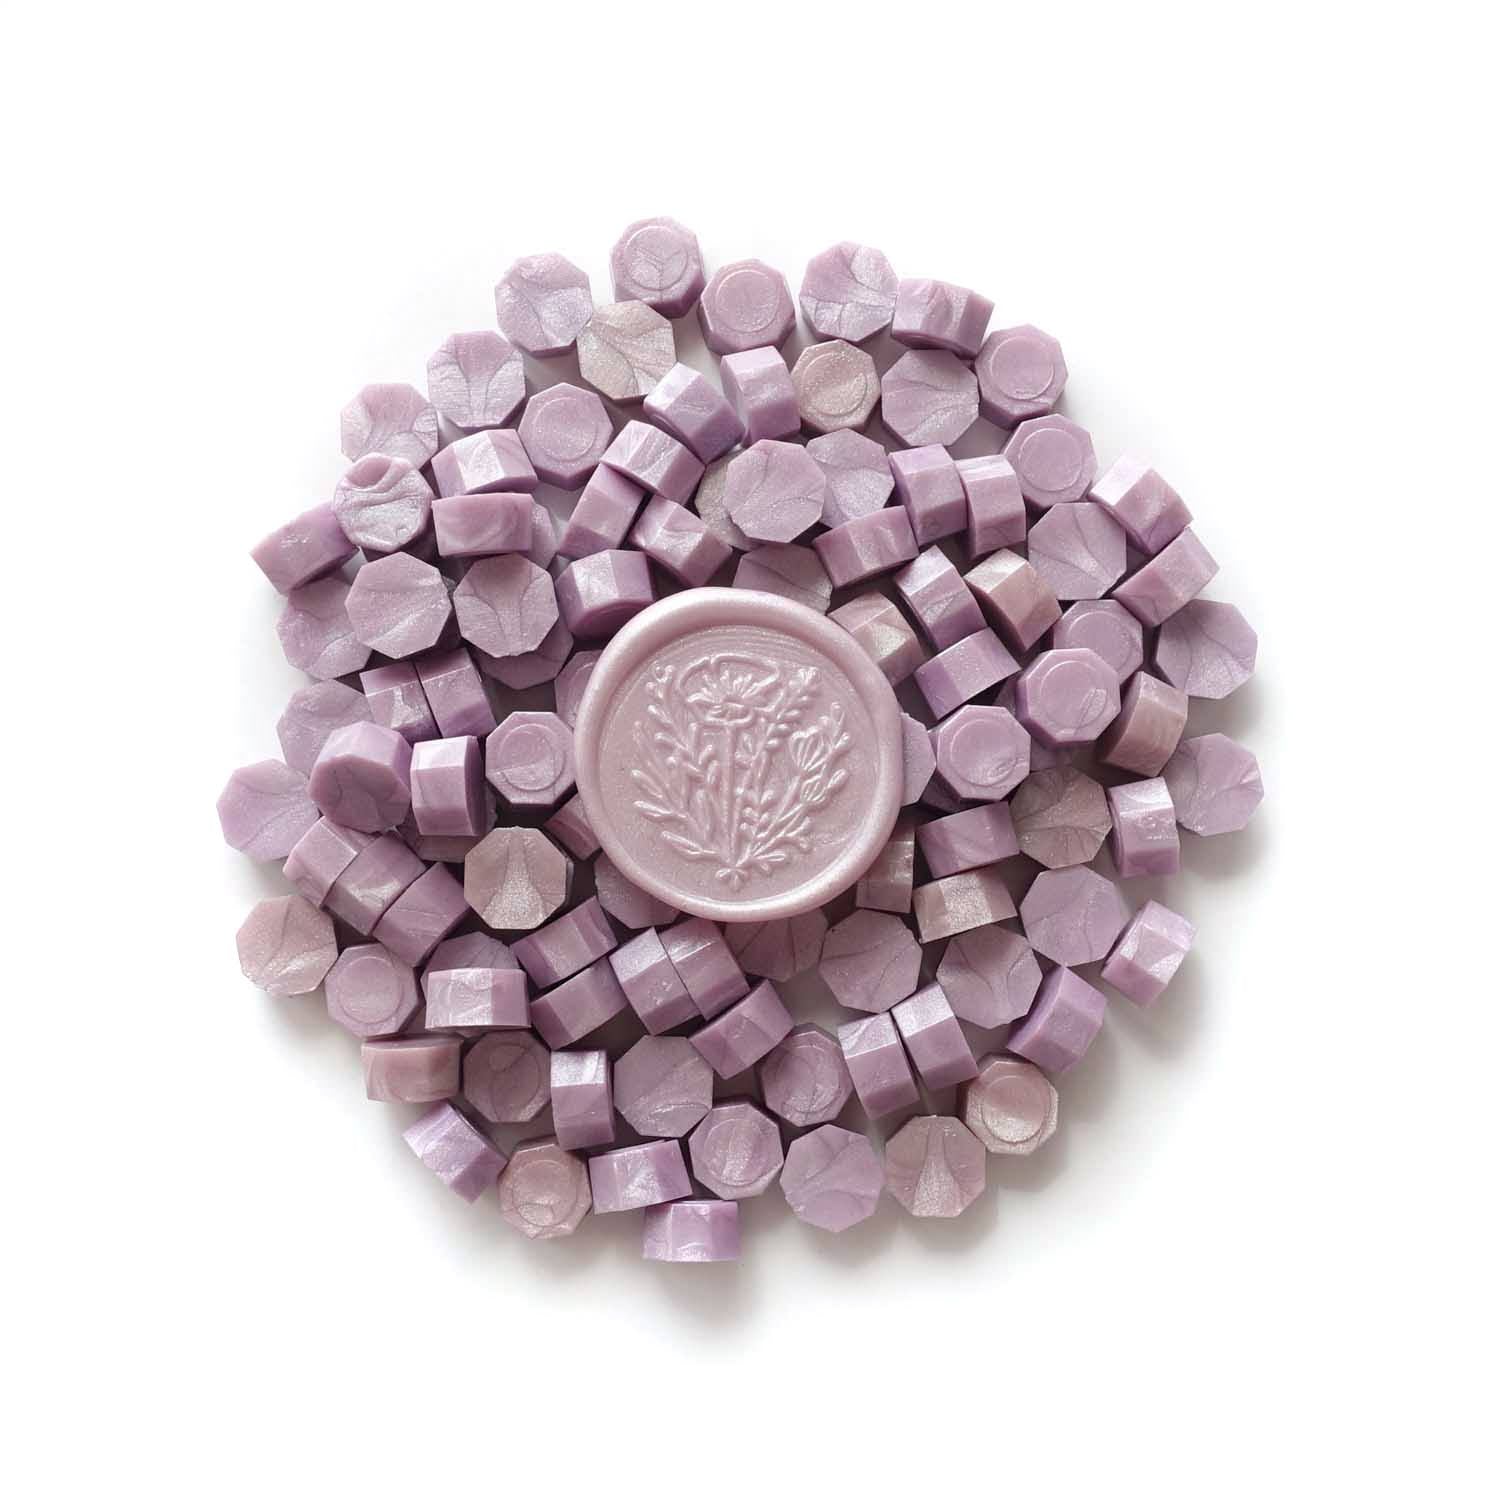 Pale light purple lilac lavender wax seal with wild flower Fiona Ariva granules